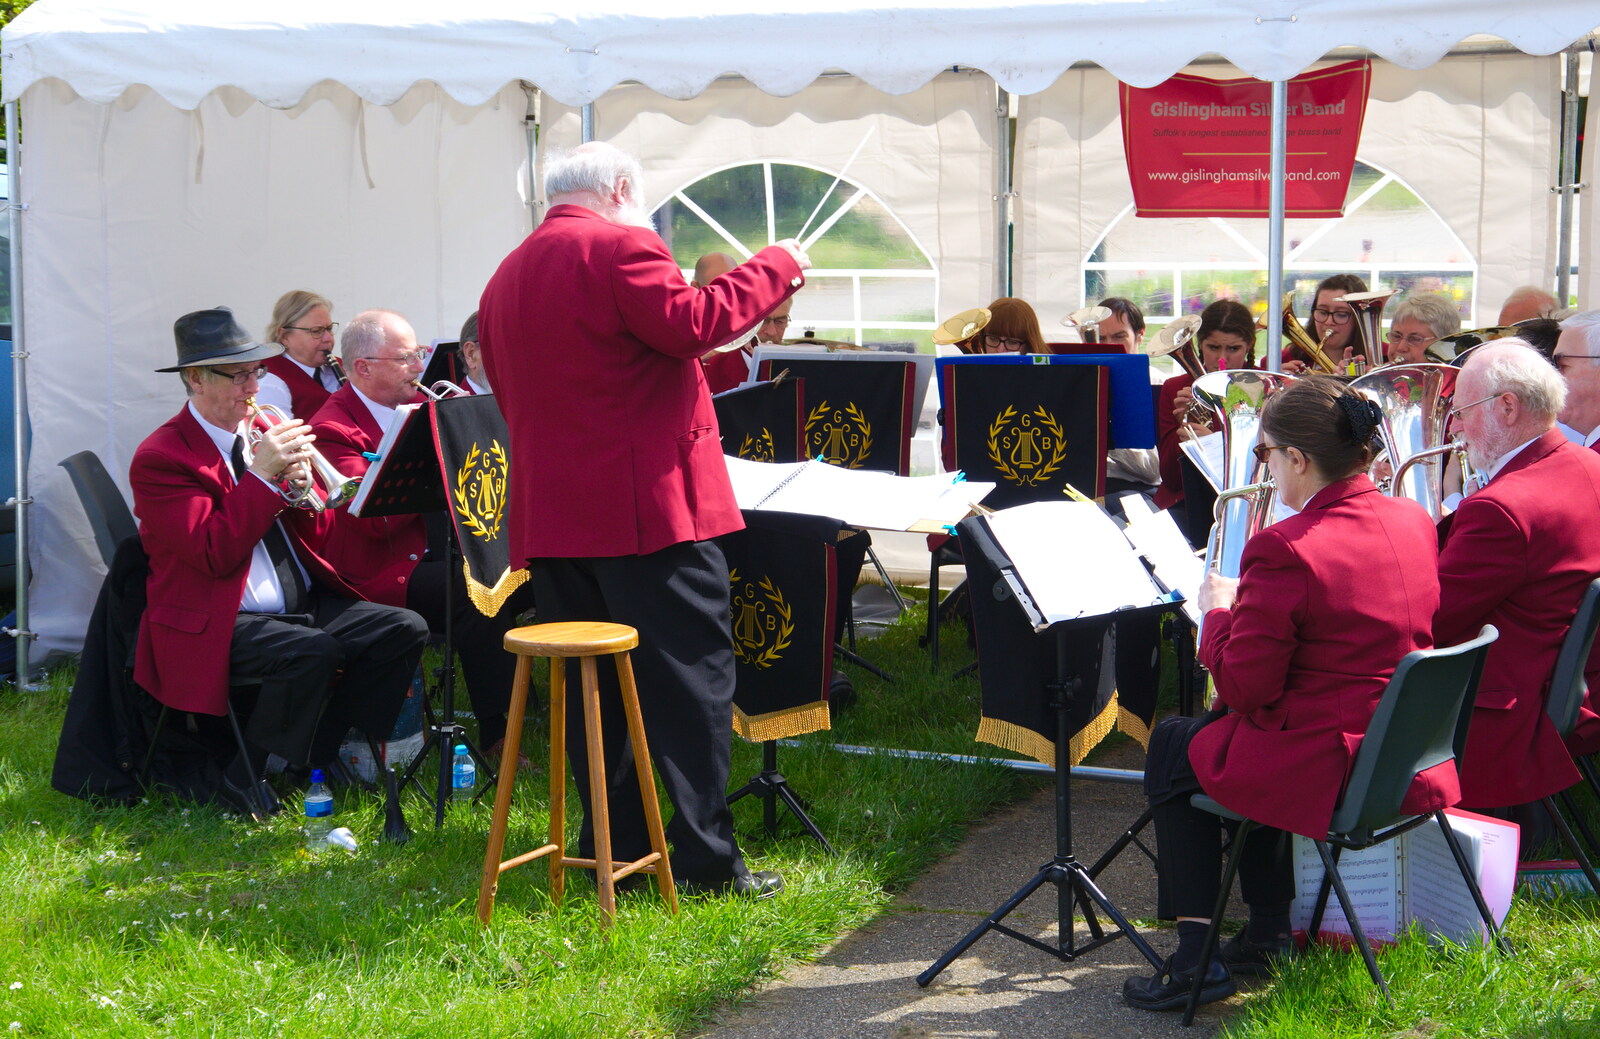 More baton waving from Adrian from The Gislingham Silver Band at the Village Hall, Gislingham, Suffolk - 12th May 2019